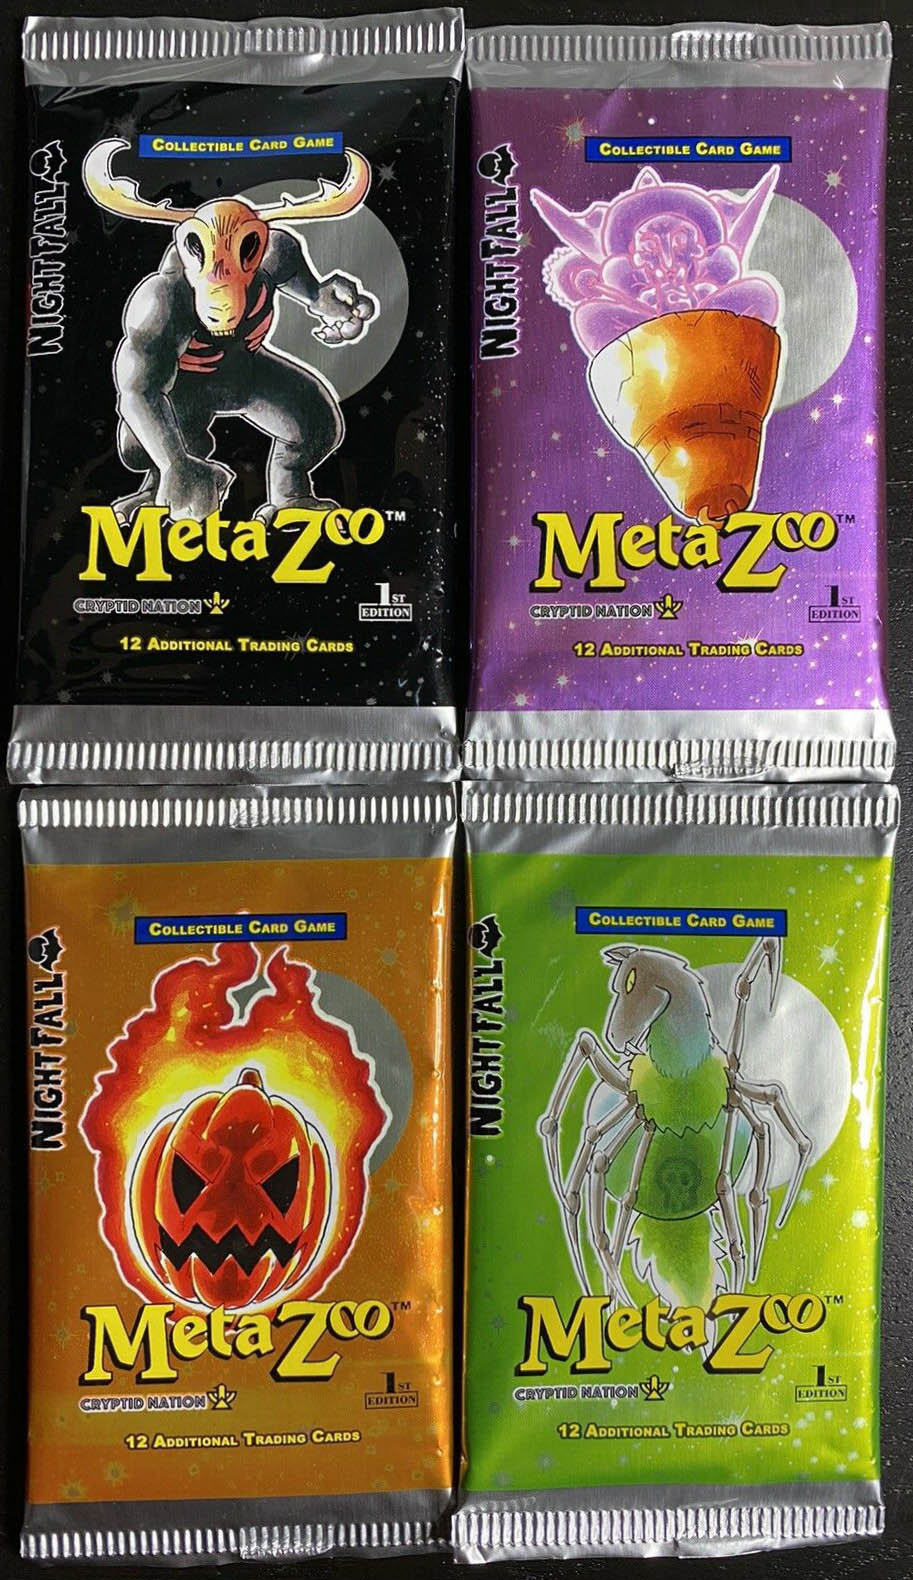 MetaZoo Cryptid Nation Nightfall Booster Packs Front